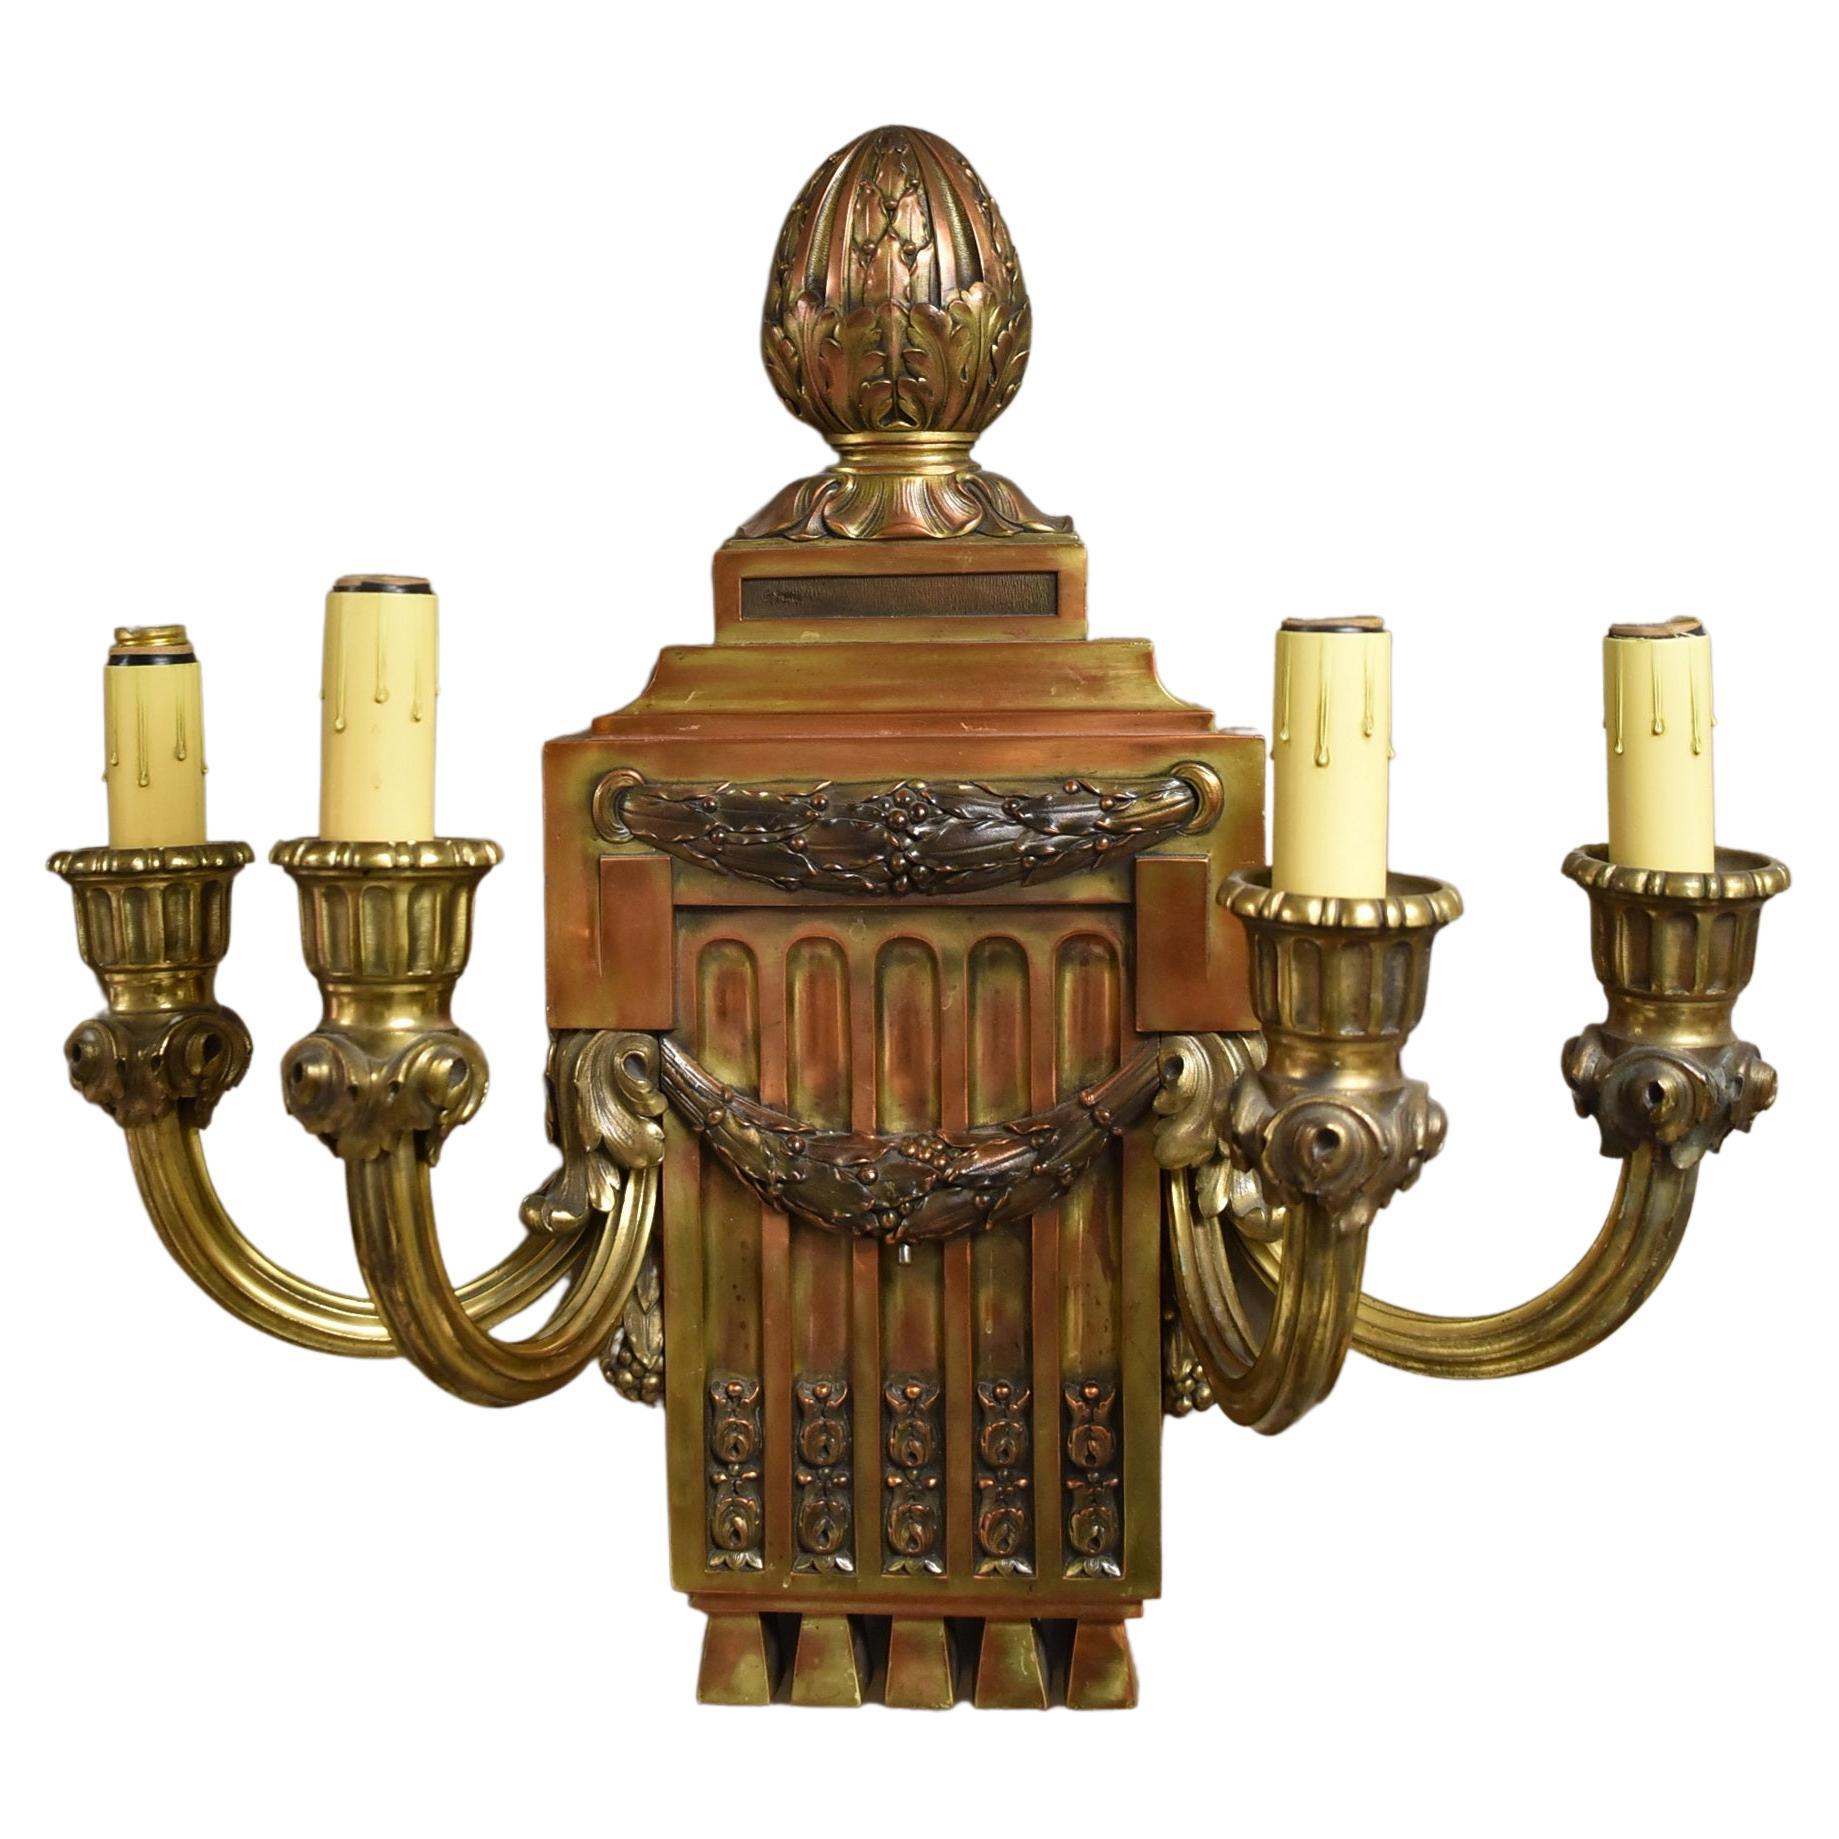 Antique vintage large brass double arm stamped brass candle socket sconce light fixture rewired